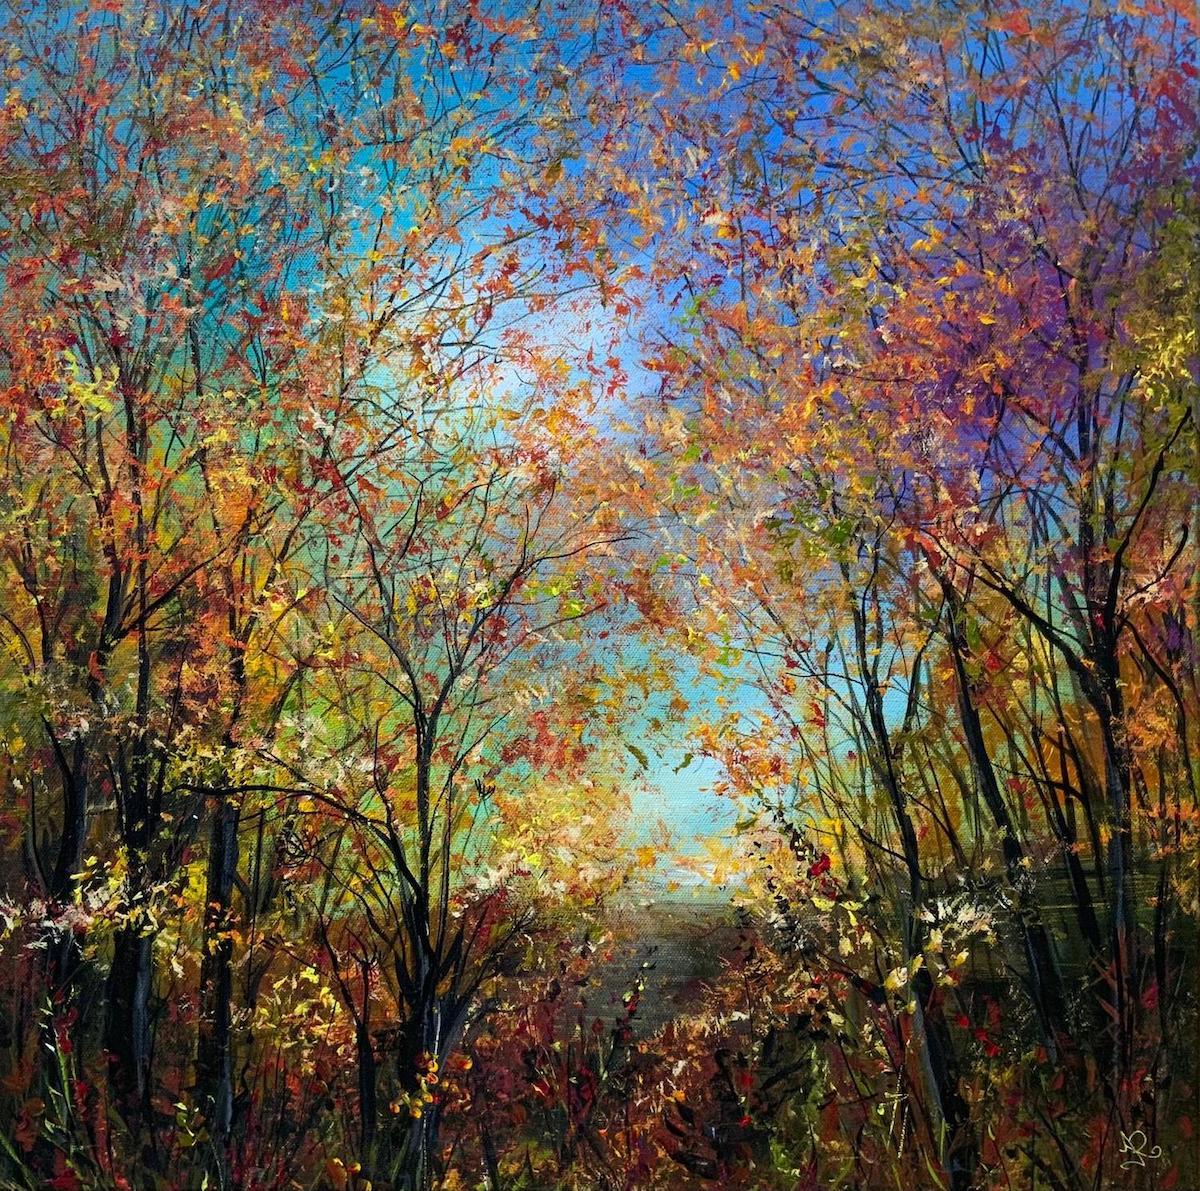 Glorious Autumn at Elnup Wood by Jan Rogers [2022]
original and hand signed by the artist
Acrylic on canvas
Image size: H:50 cm x W:50 cm
Complete Size of Unframed Work: H:50 cm x W:50 cm x D:1.8cm
Sold Unframed
Please note that insitu images are